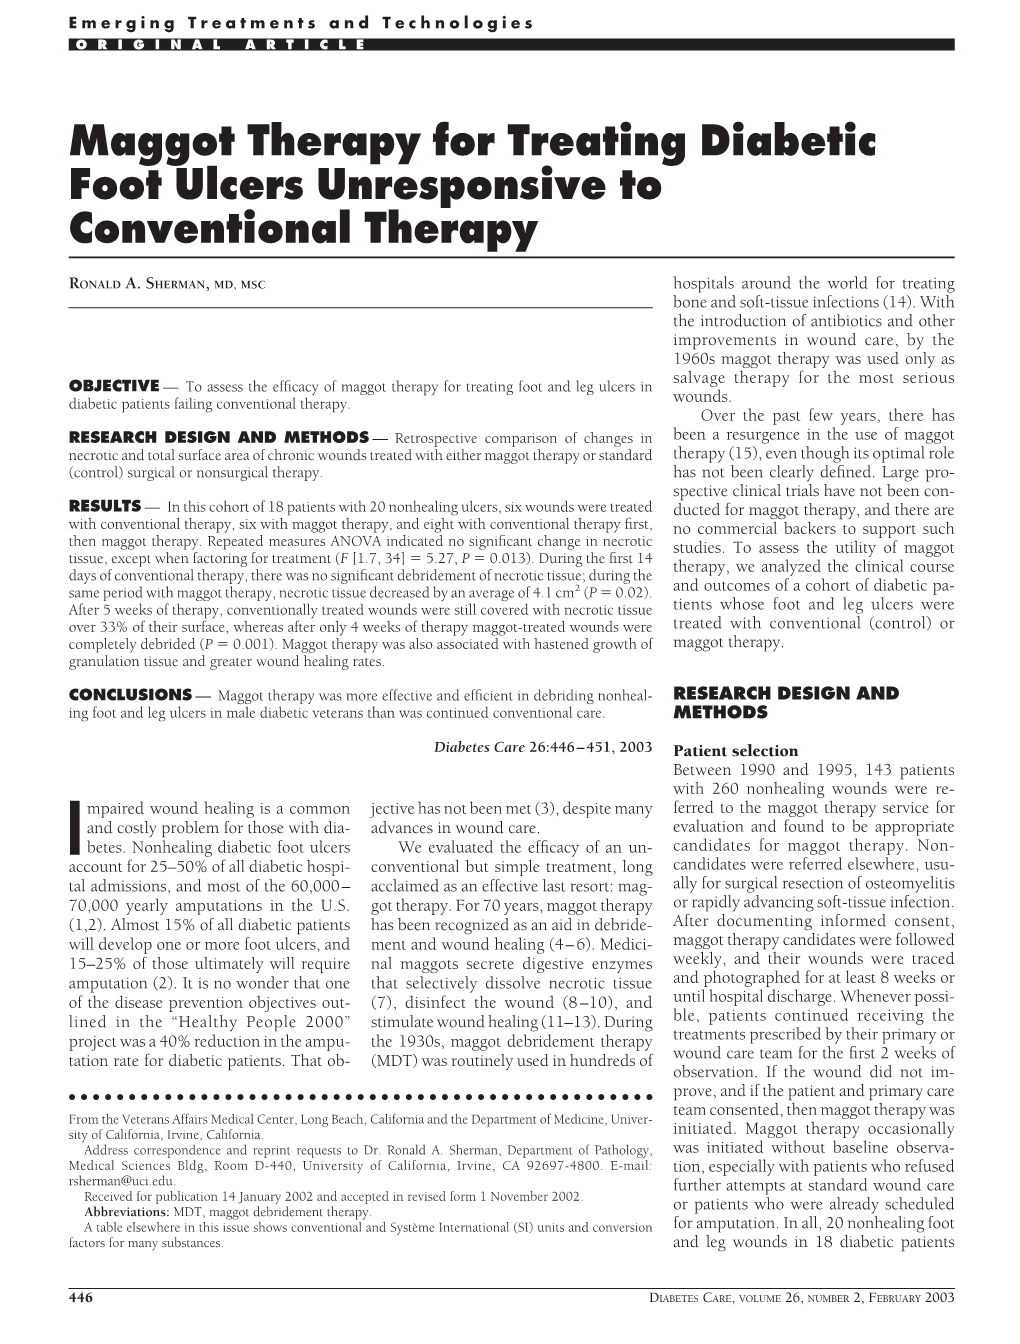 Maggot Therapy for Treating Diabetic Foot Ulcers Unresponsive to Conventional Therapy